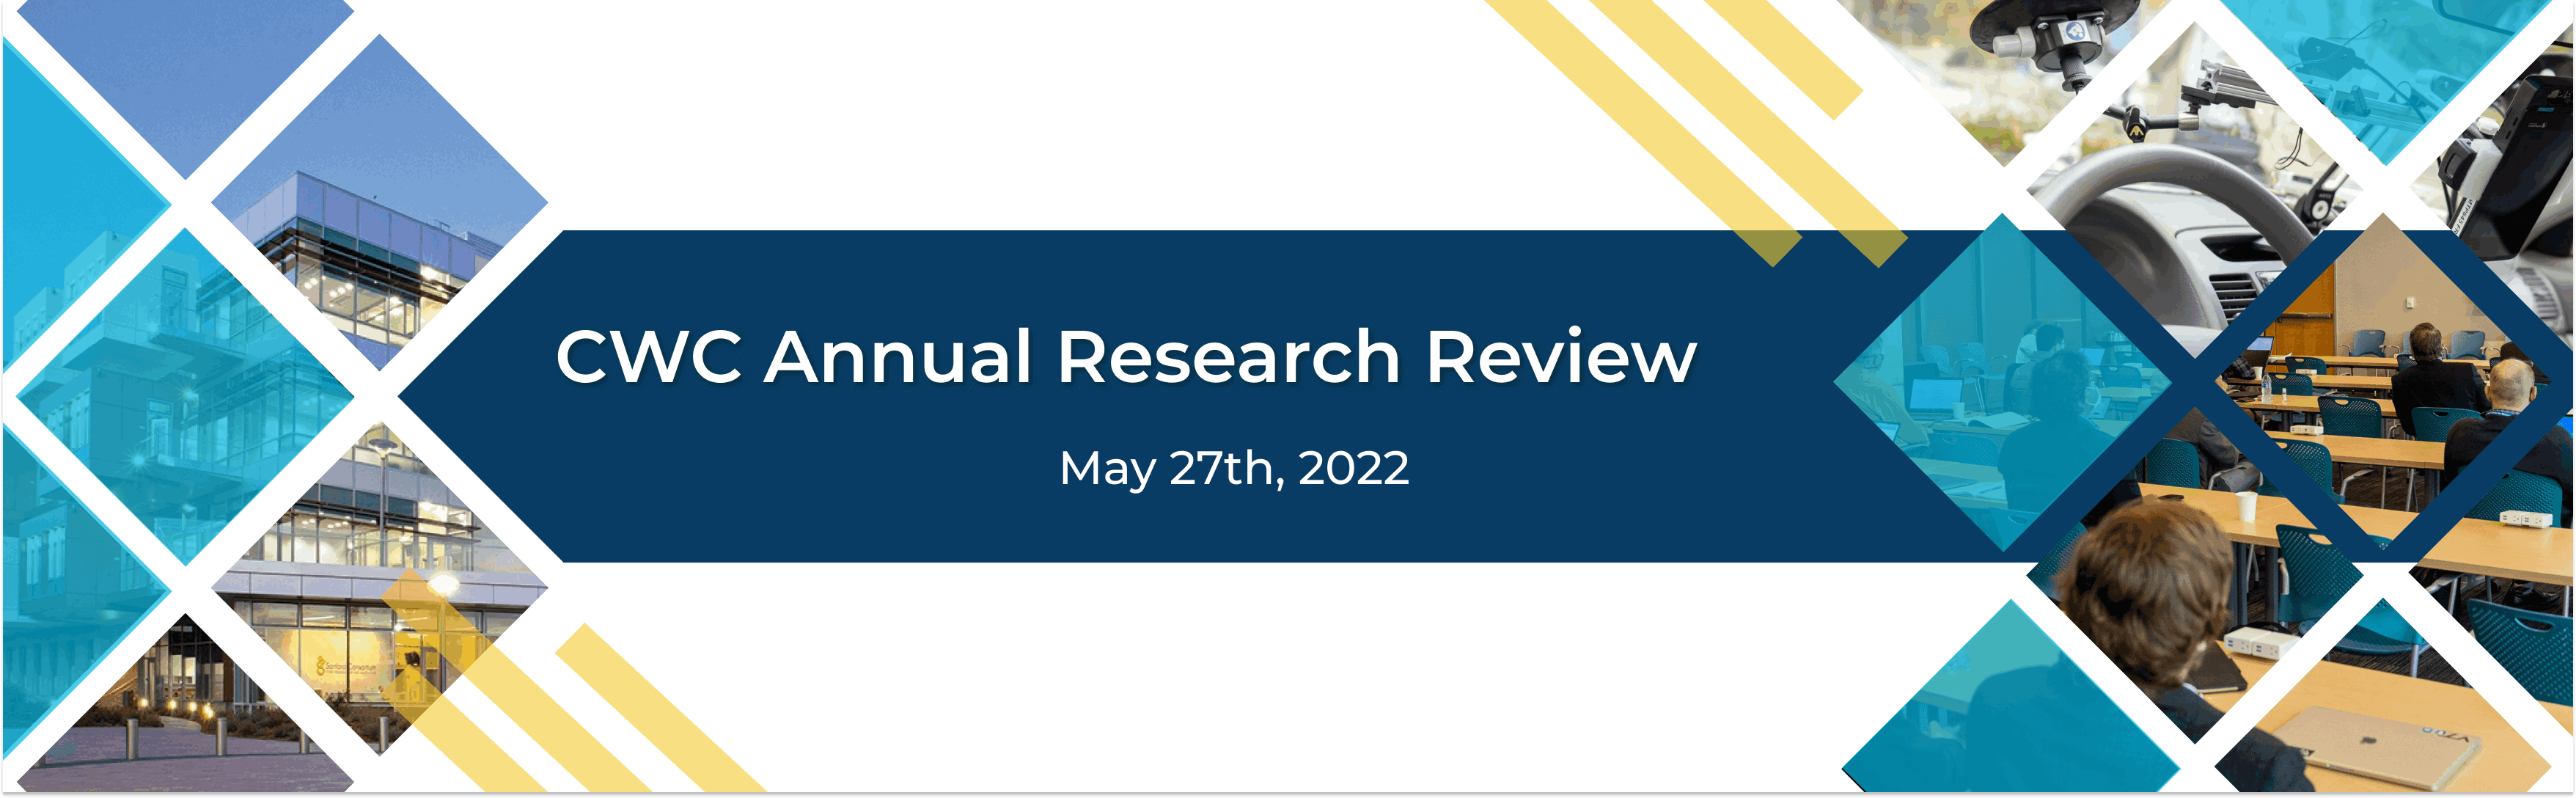 CWC Research Review 2022